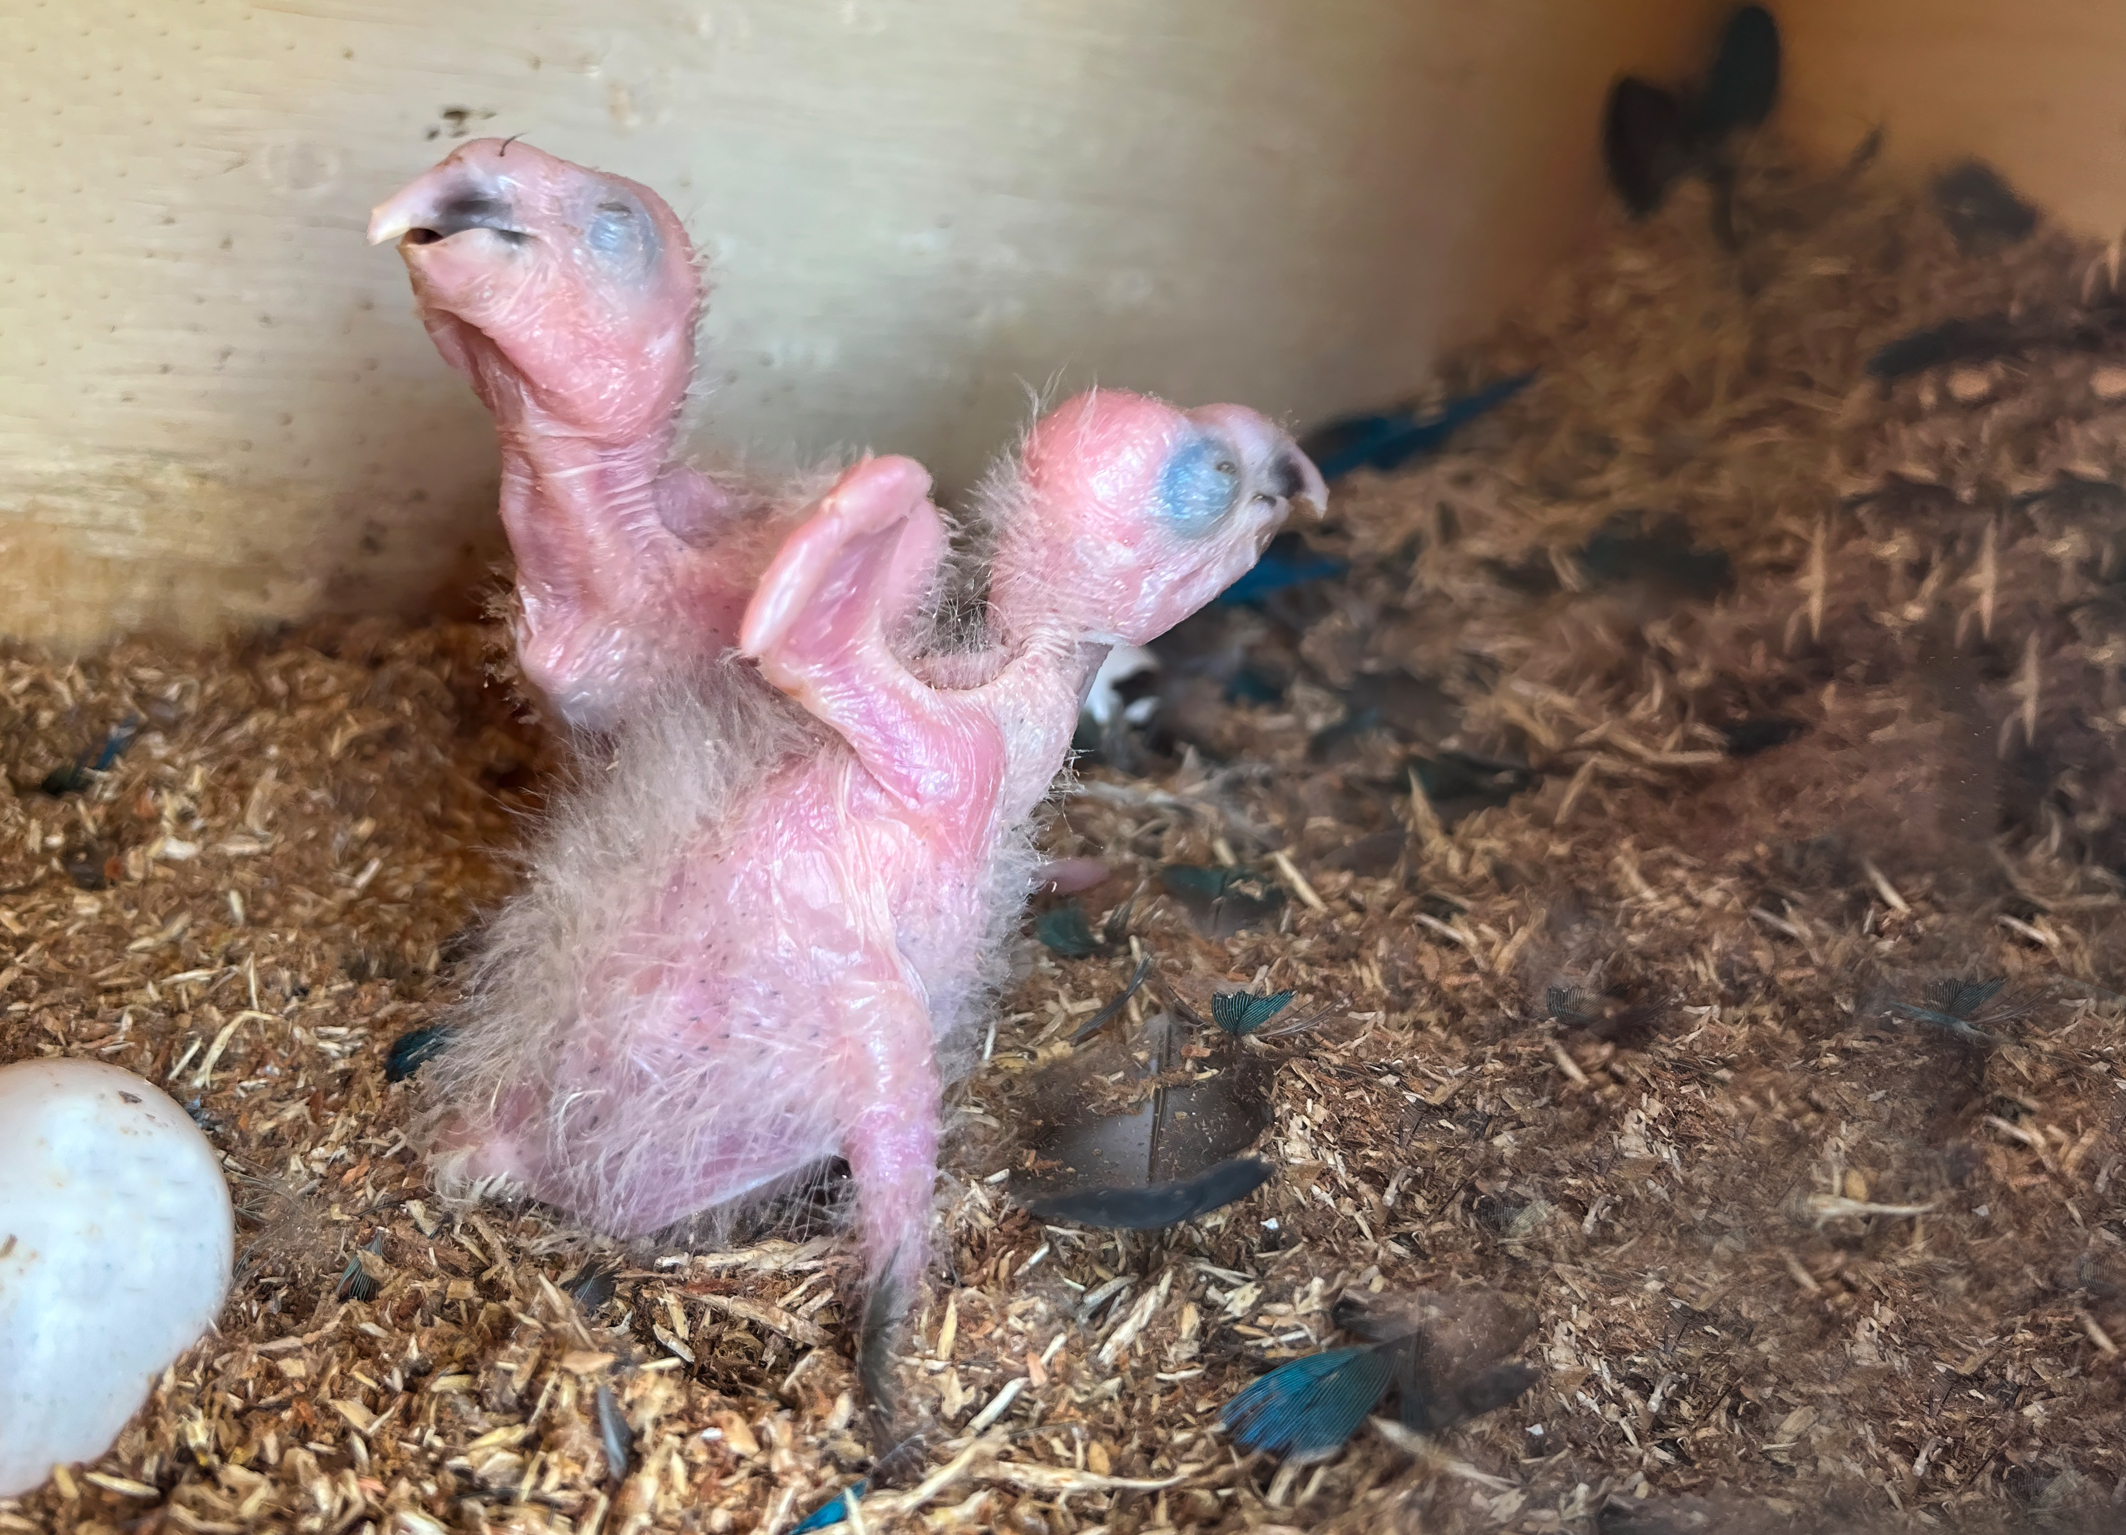 The First Spix’s Macaw Babies Born in the Wild: A New Chapter in the Reintroduction of Spix’s Macaw into the Wild